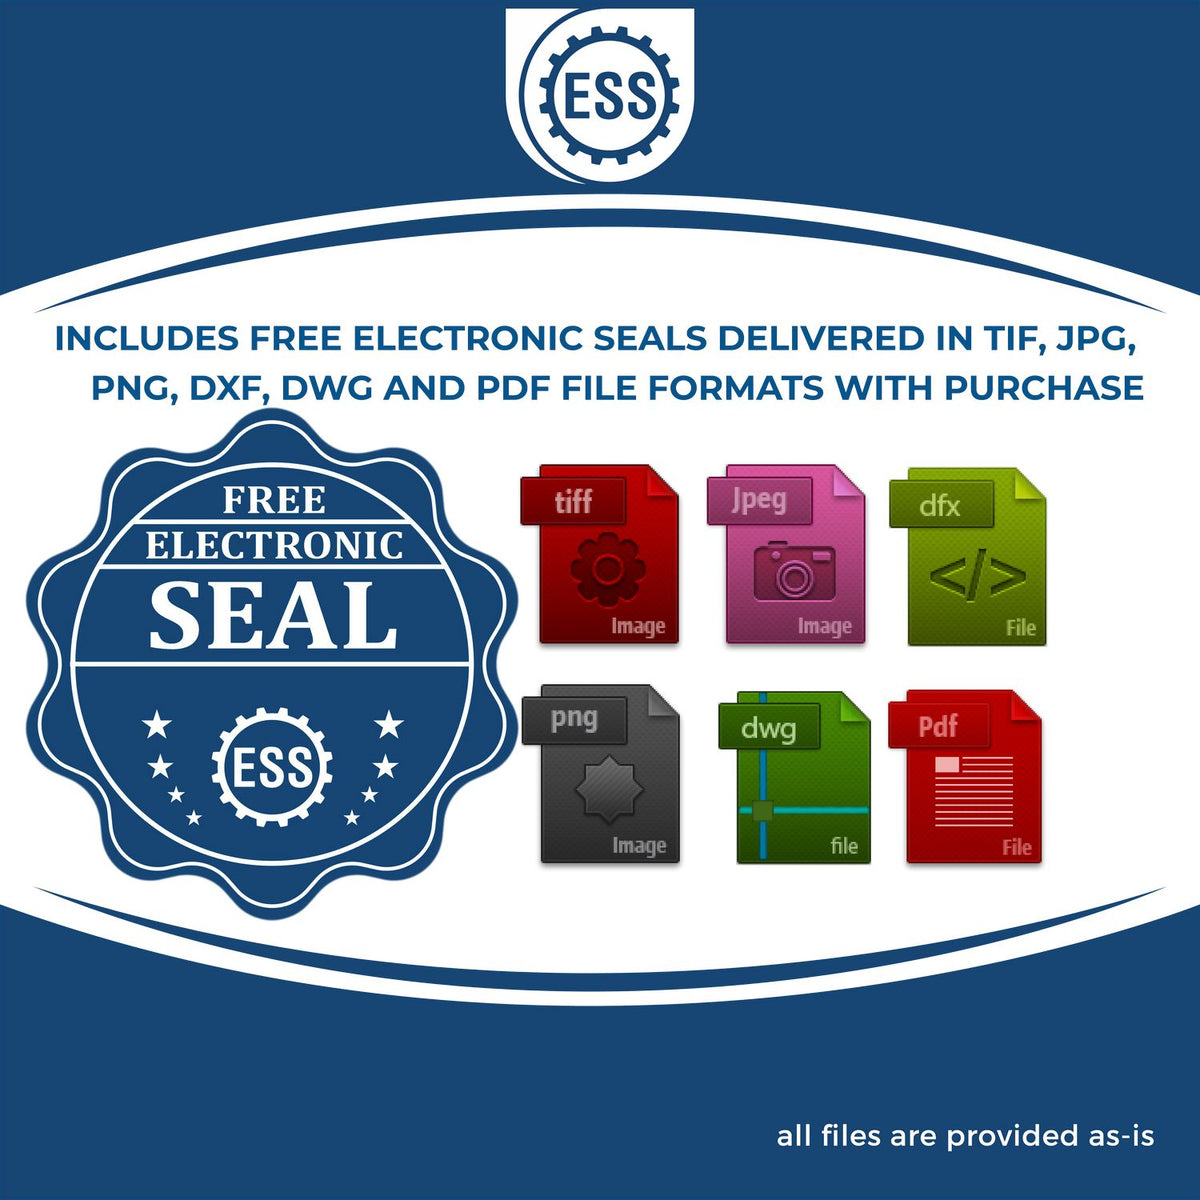 An infographic for the free electronic seal for the Heavy Duty Cast Iron Florida Engineer Seal Embosser illustrating the different file type icons such as DXF, DWG, TIF, JPG and PNG.